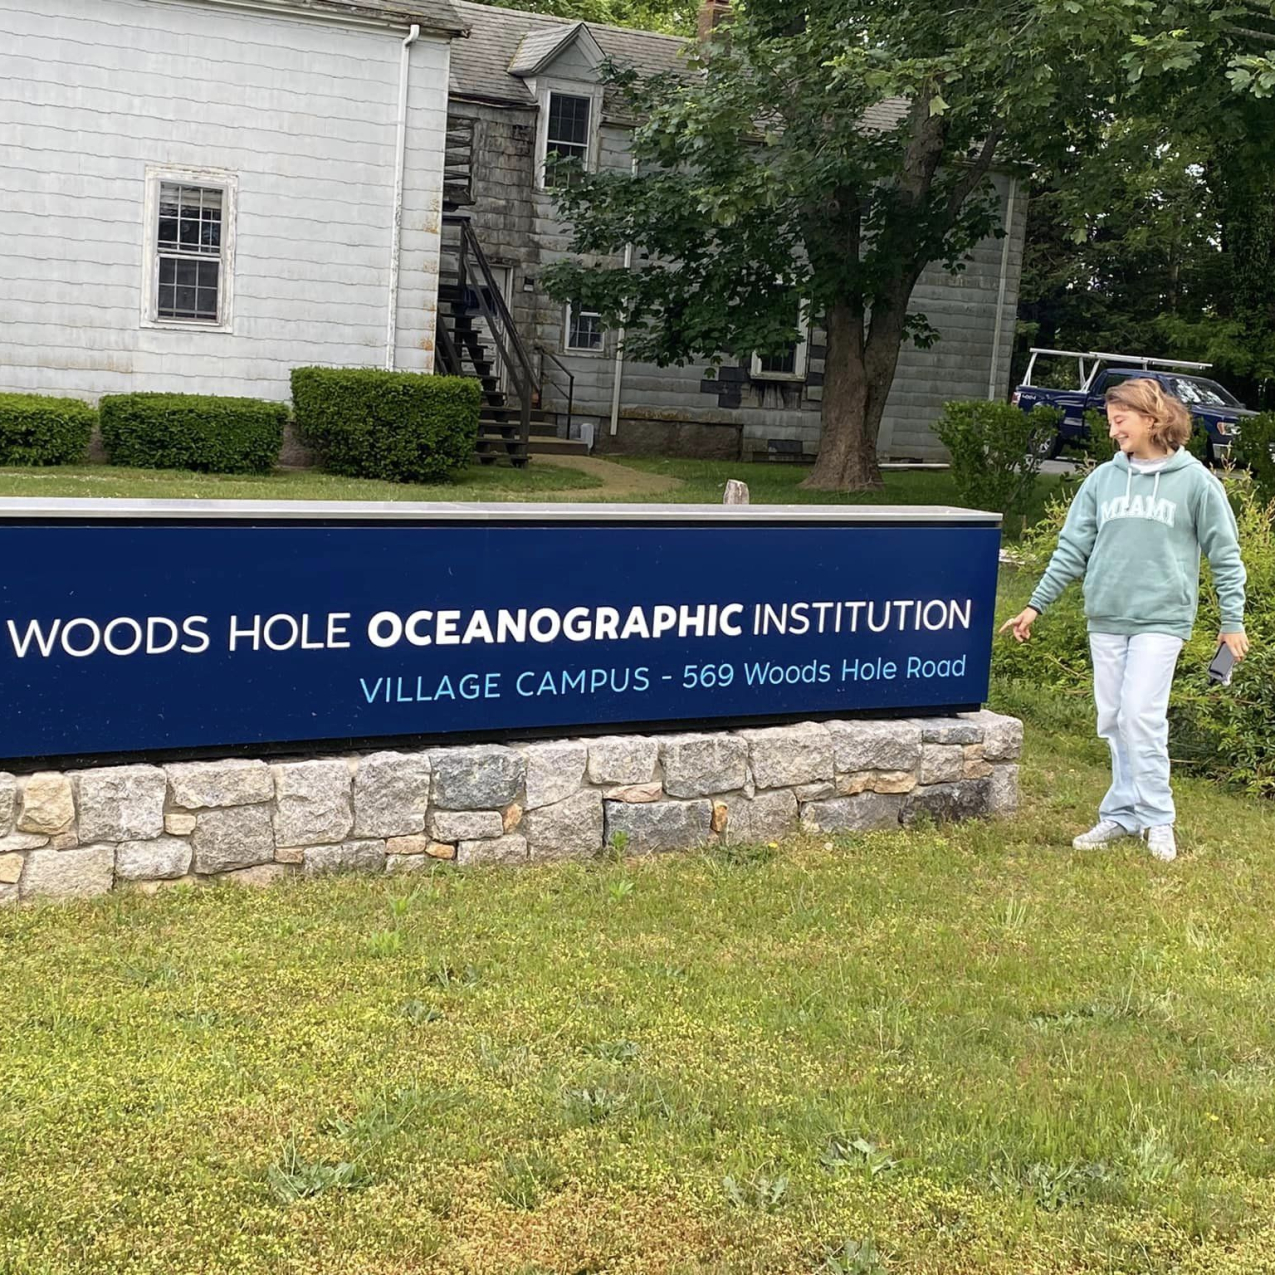 Allie stands outside next to a sign that reads "Woods Hole Oceanographic Institution. Village Campus.